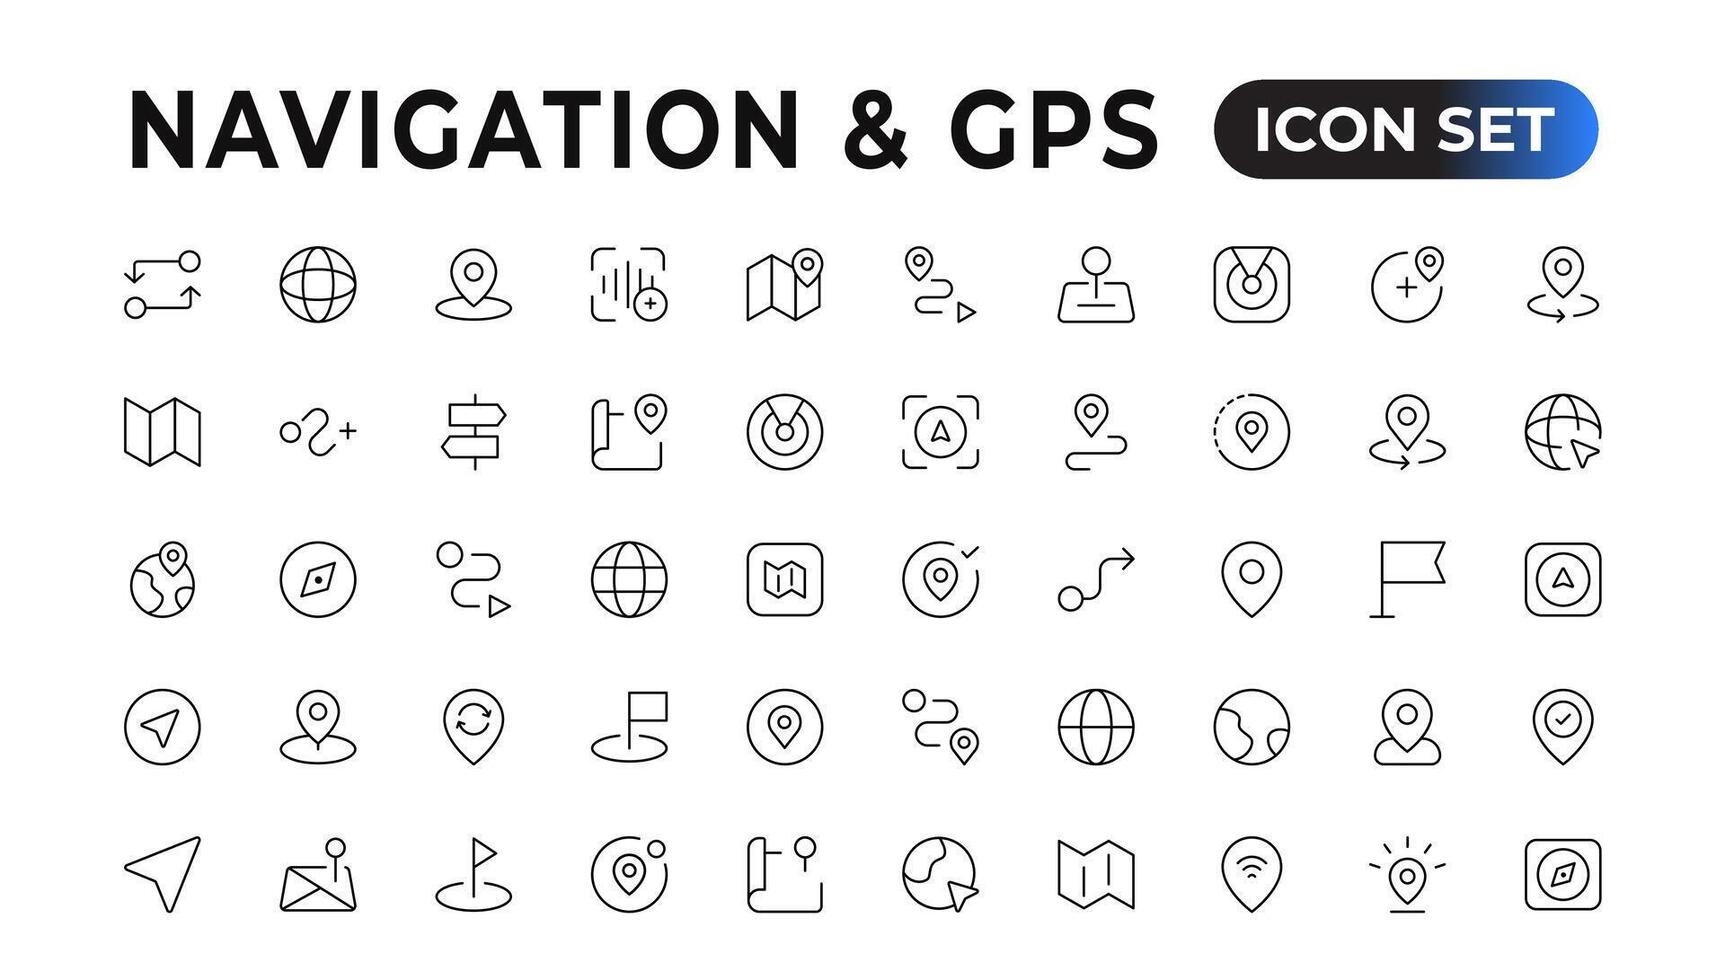 Location icon set. Containing map, map pin, gps, destination, directions, distance, place, navigation and address icons. Solid icons vector collection.